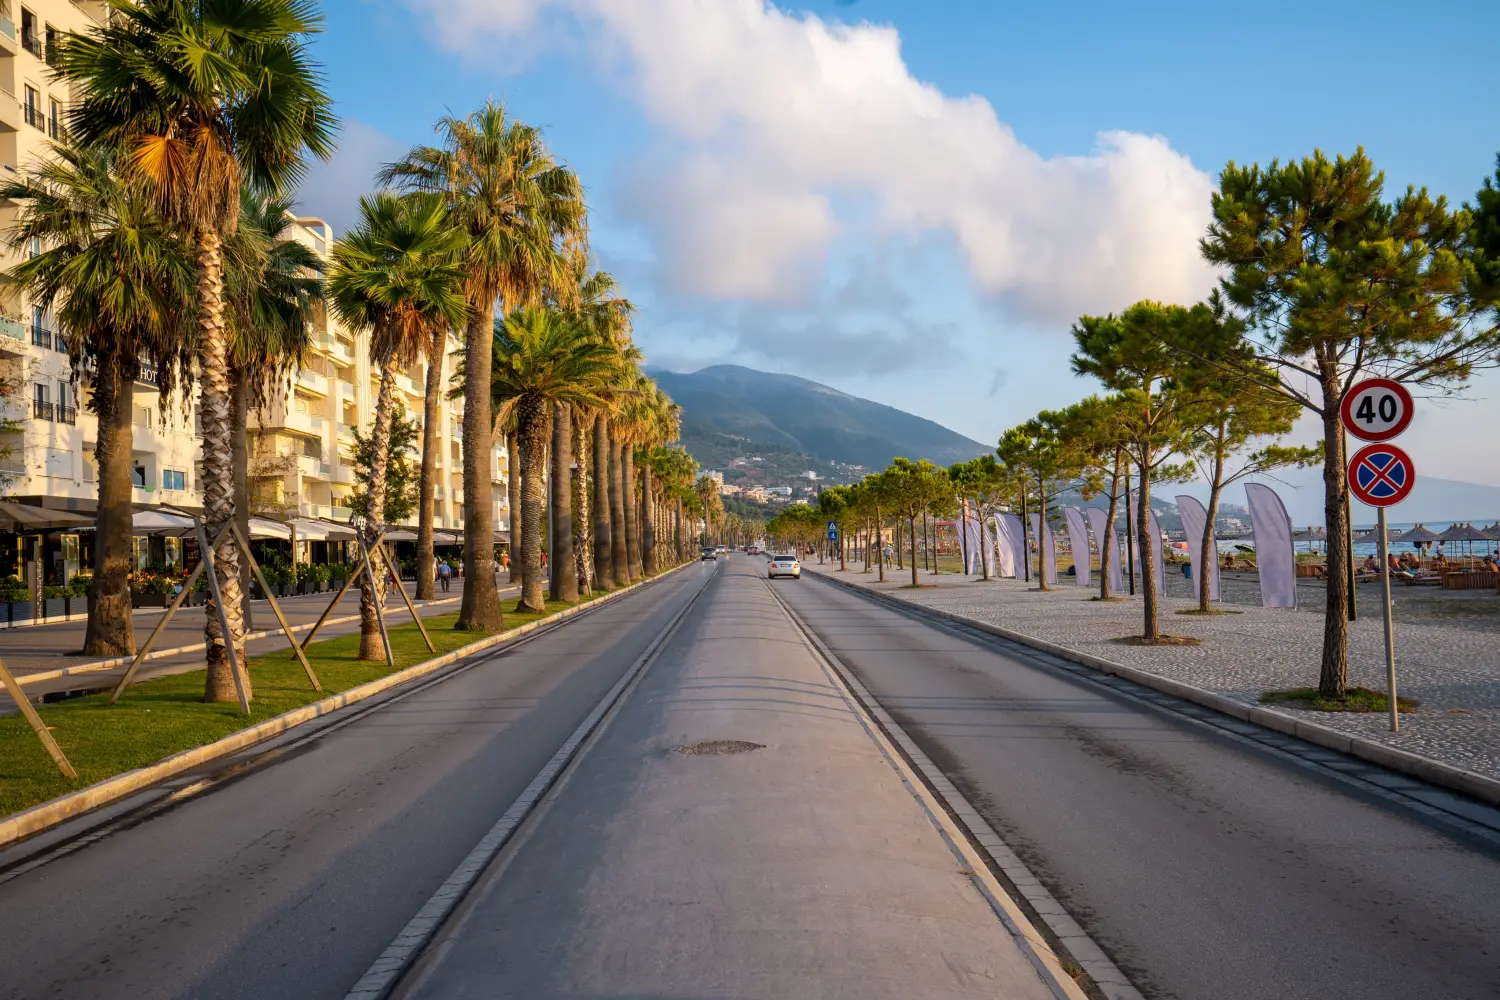 Road View surrounded by palm trees in Vlora